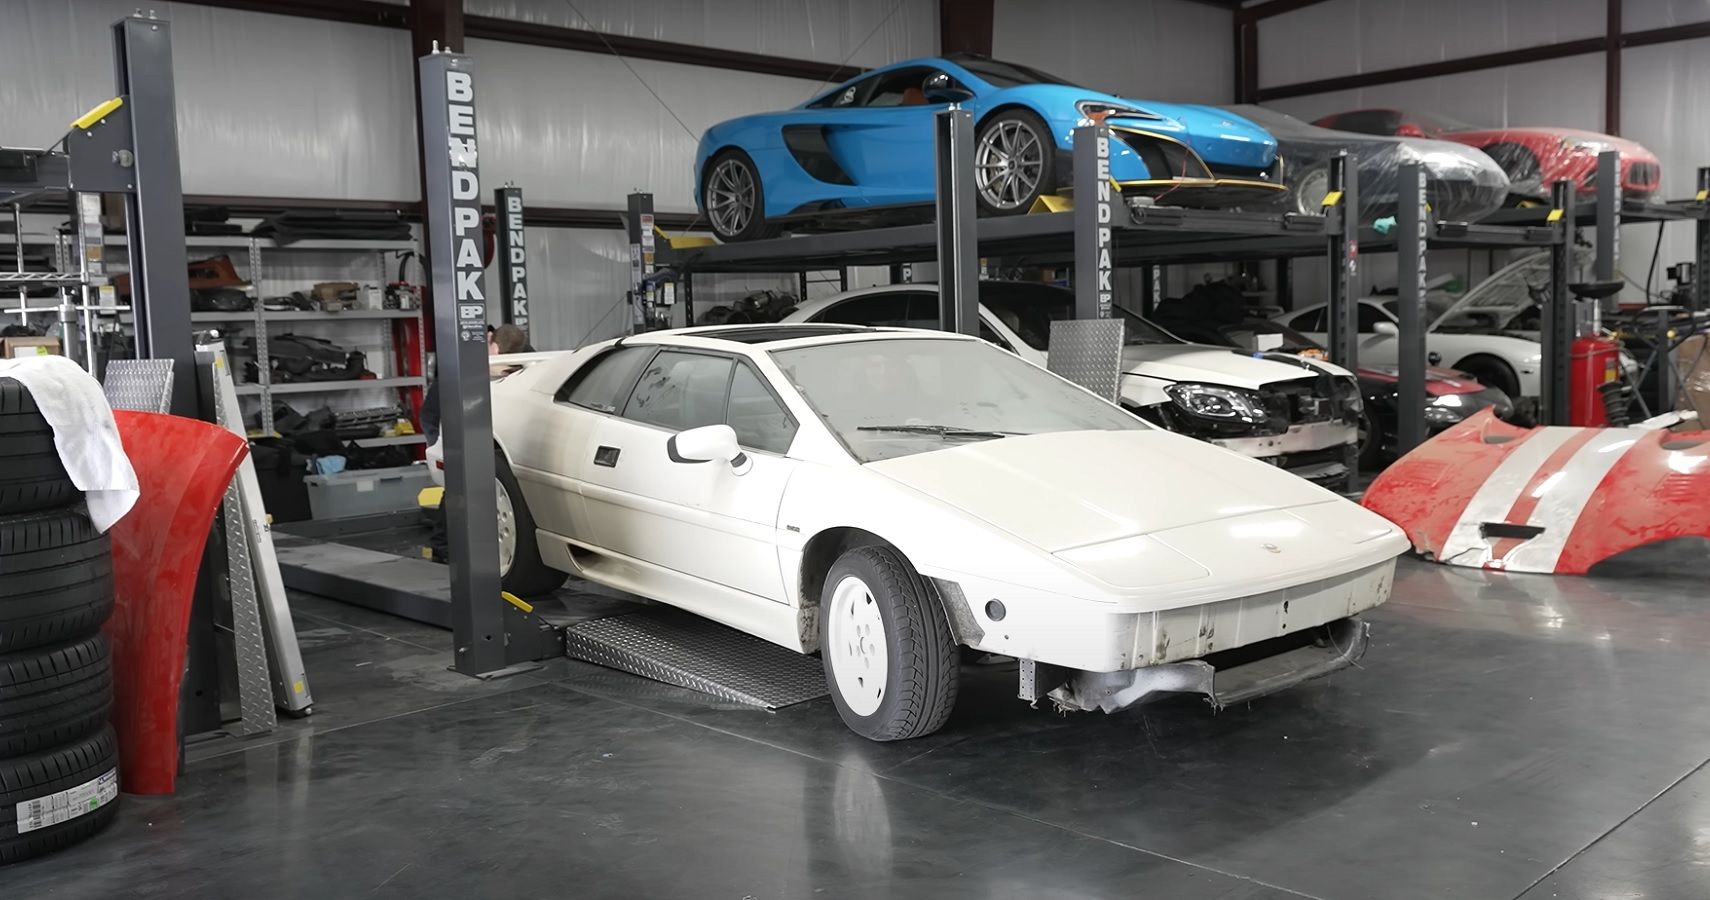 The Real Reason Why Tavarish Had To Pull The Plug On His Lotus Esprit Project